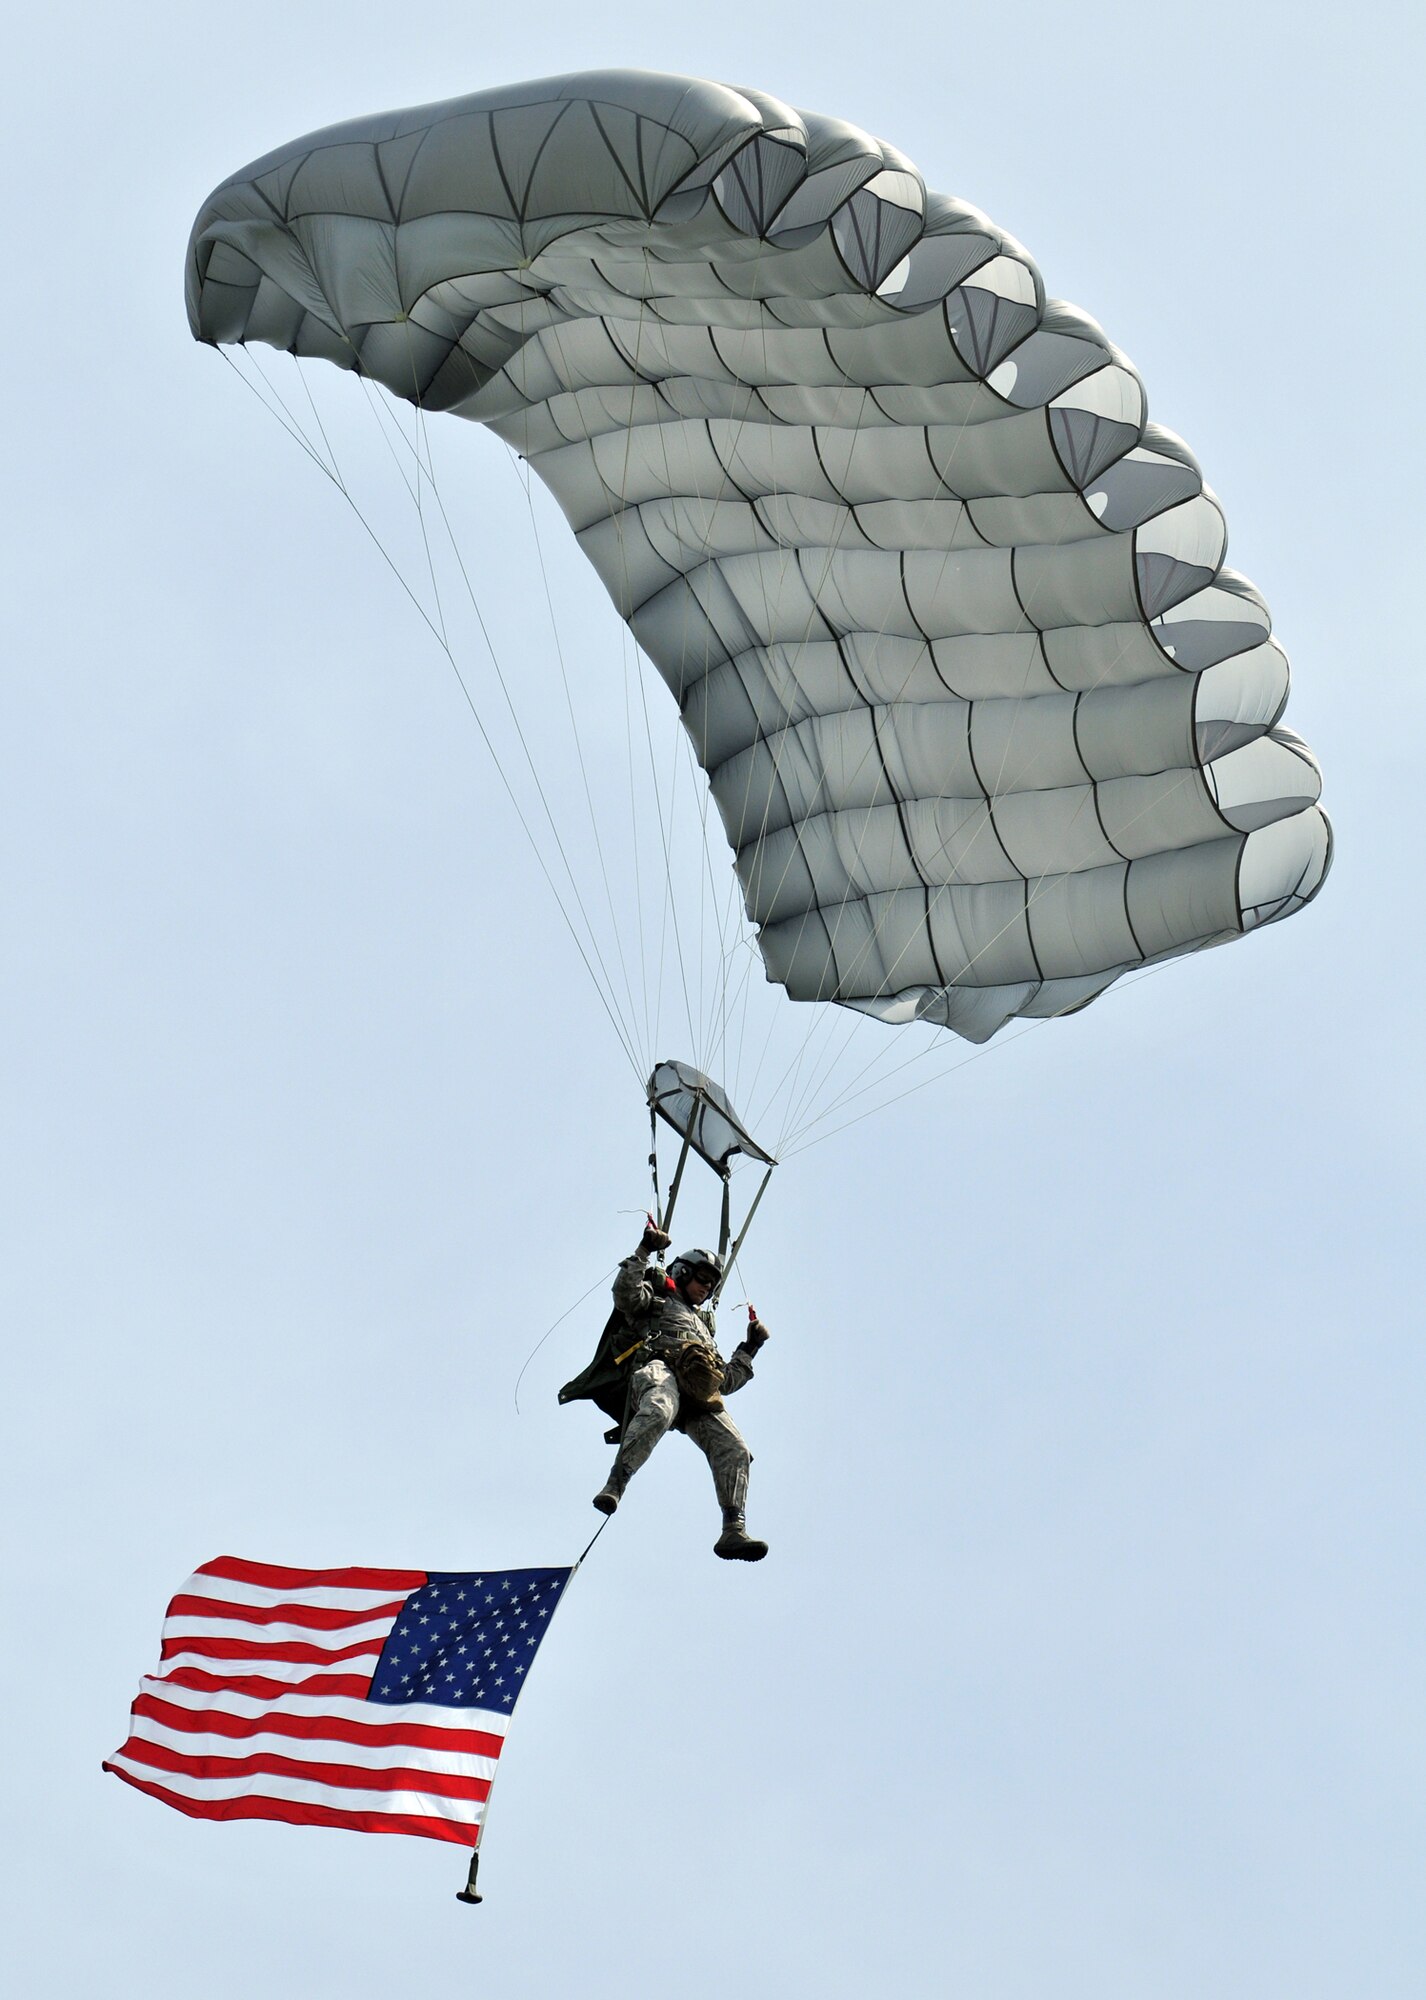 A member of the 321st Special Tactics Squadron flies the American flag June 5, 2010, over the famous "Iron Mike" drop zone in Normandy, France, where the Allies first landed in the D-Day invasion of World War II. The jump was part of a ceremony commemorating the 66th anniversary of D-Day. The 321st STS is from Royal Air Force Mildenhall, England. (U.S. Air Force photo/Staff Sgt. Austin M. May)